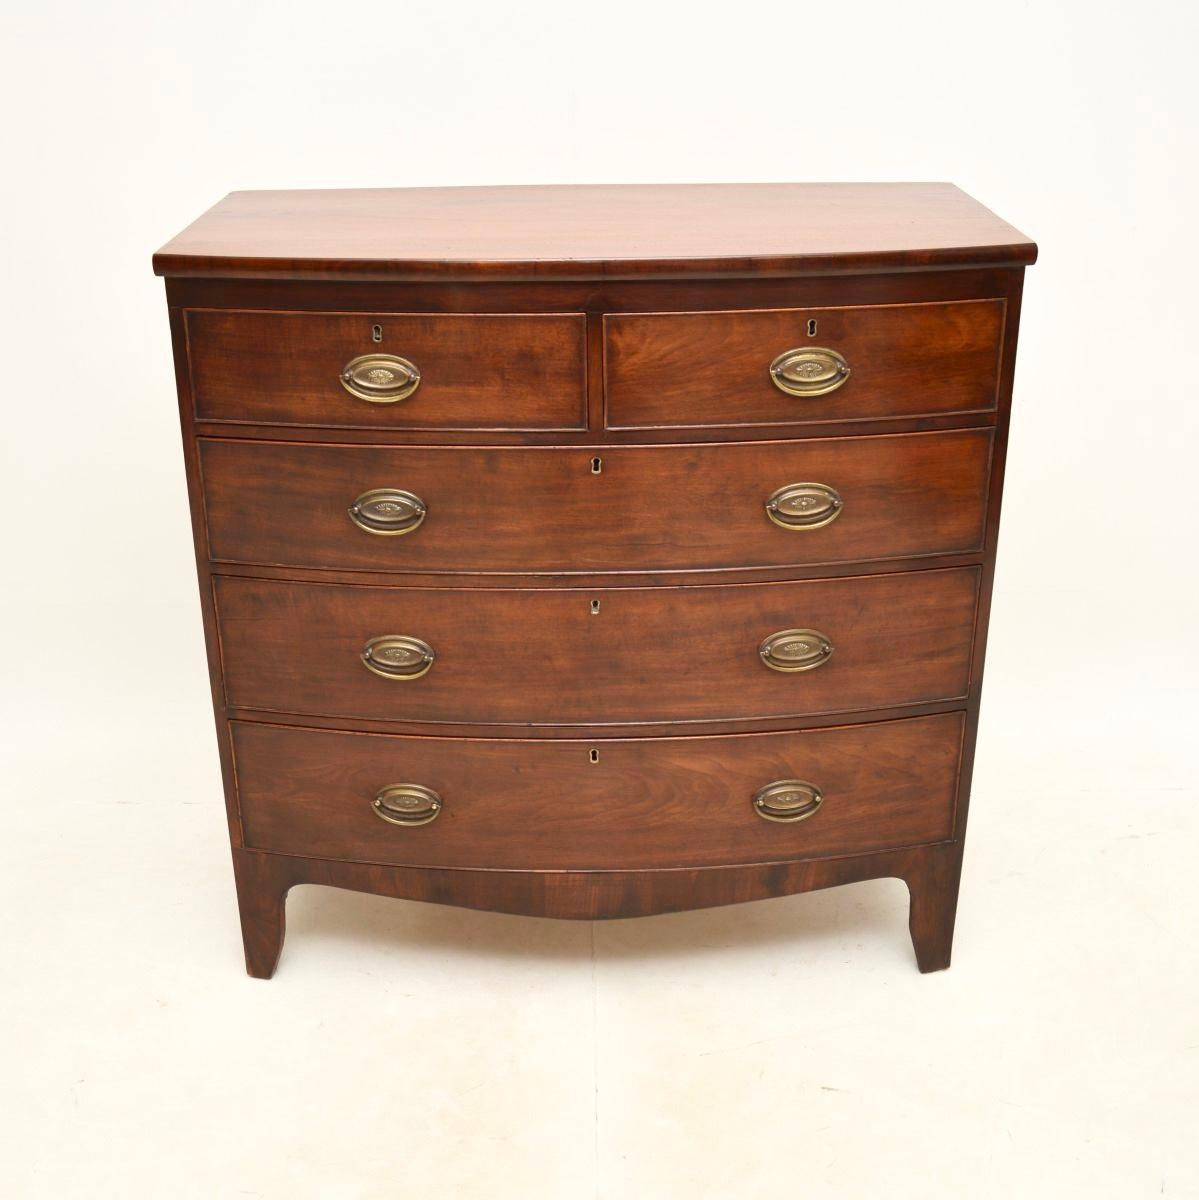 A smart and very well made antique Georgian bow fronted chest of drawers. This was made in England, it dates from around the 1800-1820 period.

It is of fantastic quality with a lovely and very useful design. It’s a great size with lots of storage